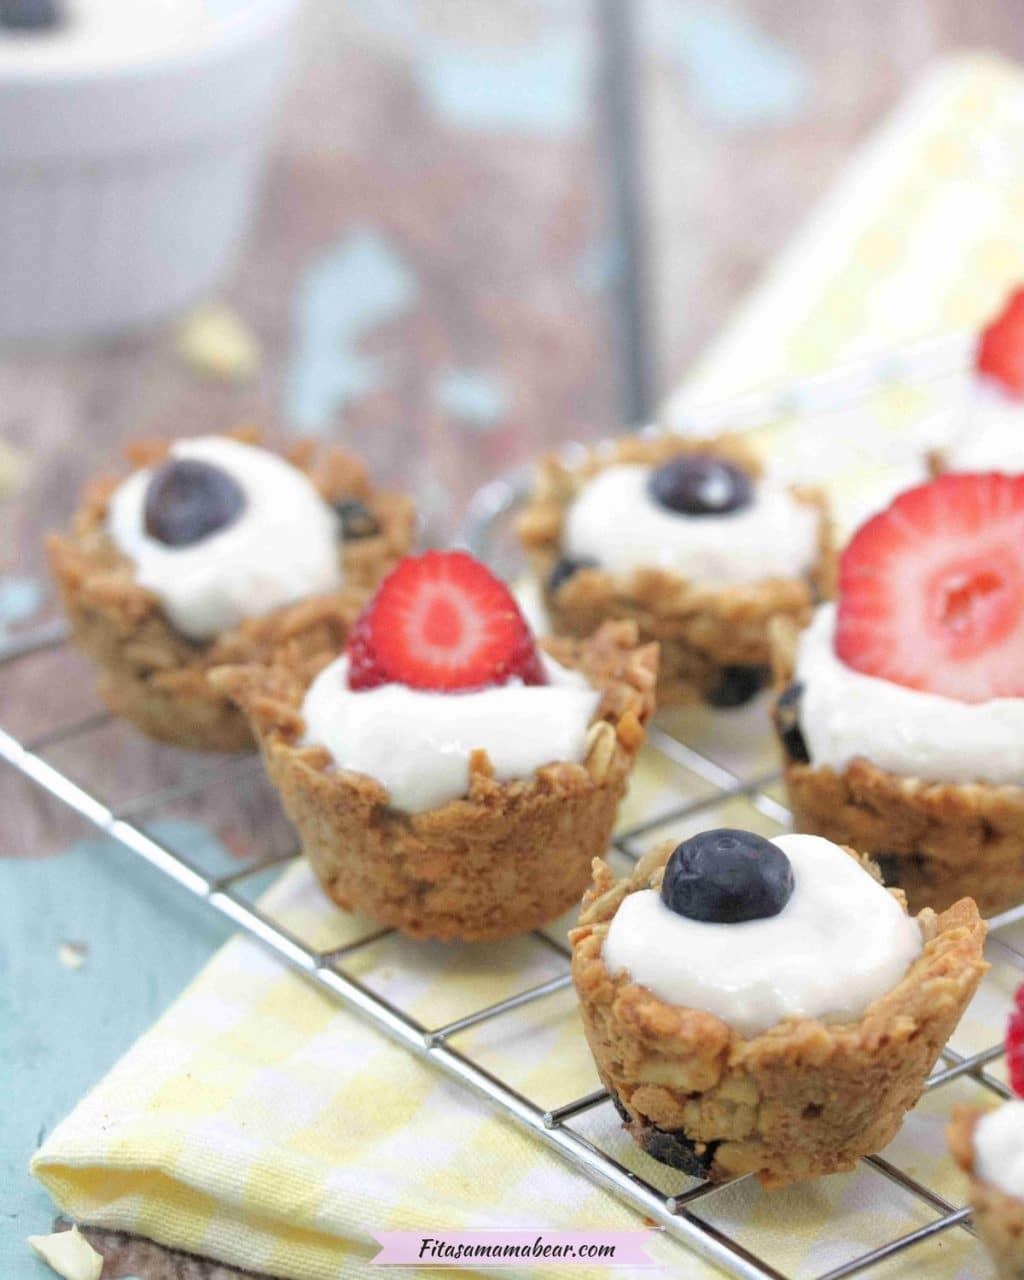 Mini granola cups topped with yogurt and blueberries and strawberries on a cooling rack over a yellow linen